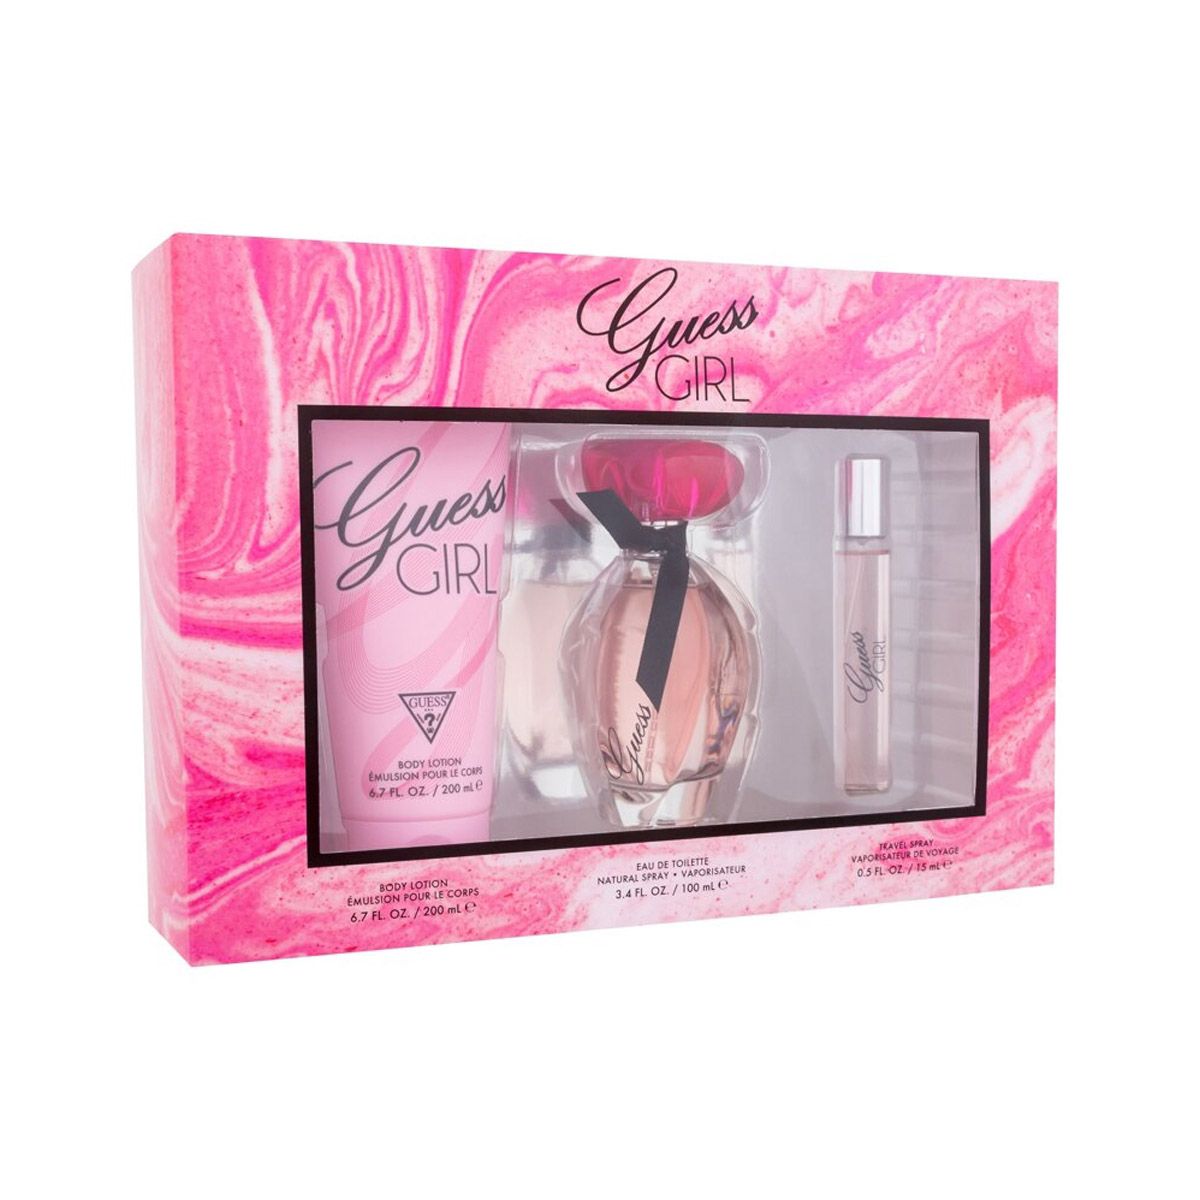 Guess Girl 3 piece Gift Set for Women at Ratans Online Shop - Perfumes Wholesale and Retailer Gift Set